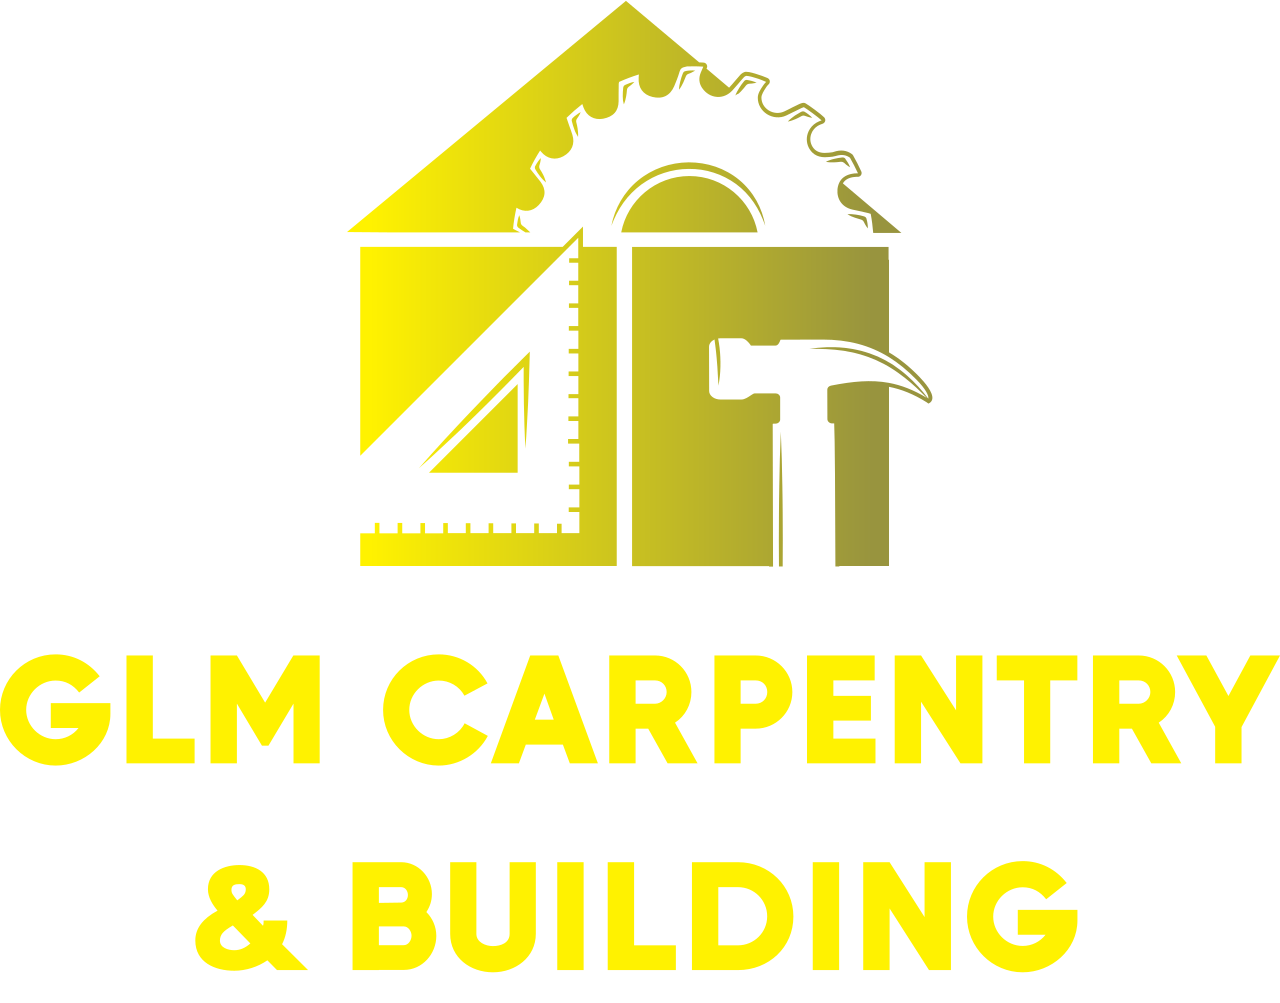 GLM Carpentry
& Building's web page